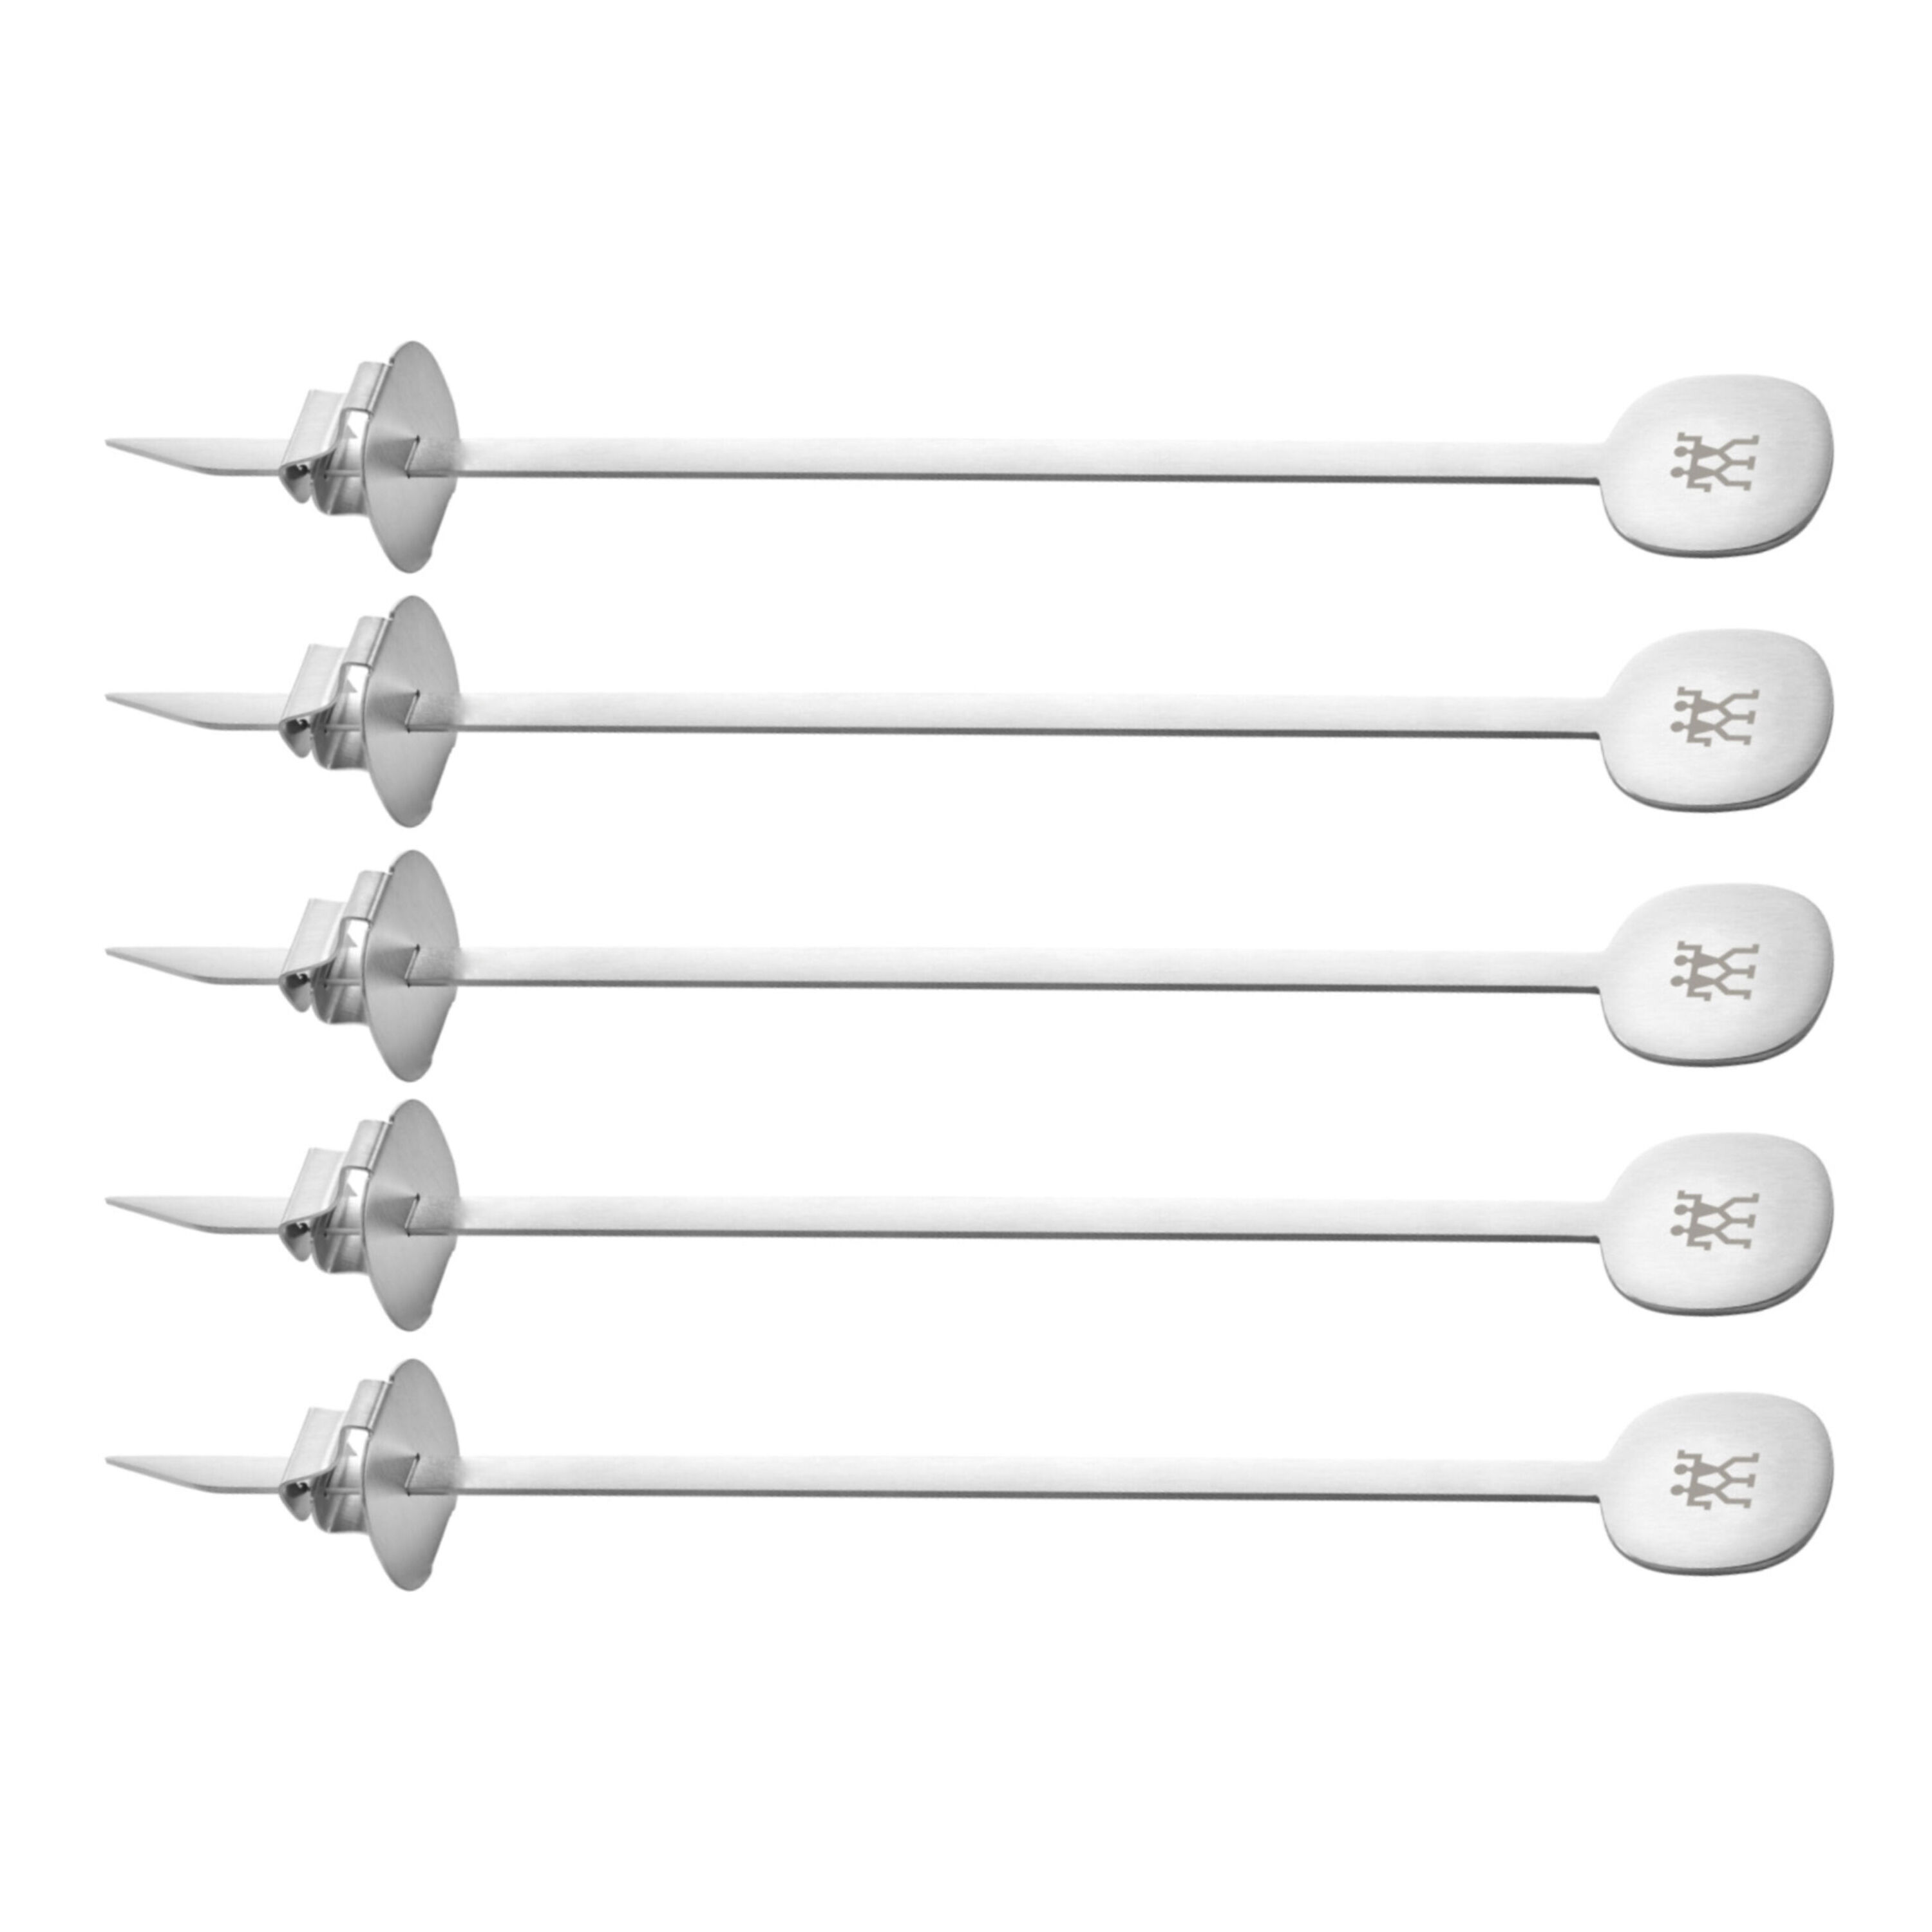 https://www.zwilling.com/on/demandware.static/-/Sites-zwilling-master-catalog/default/dw81835a99/images/large/zwilling-bbq-skewers.jpg